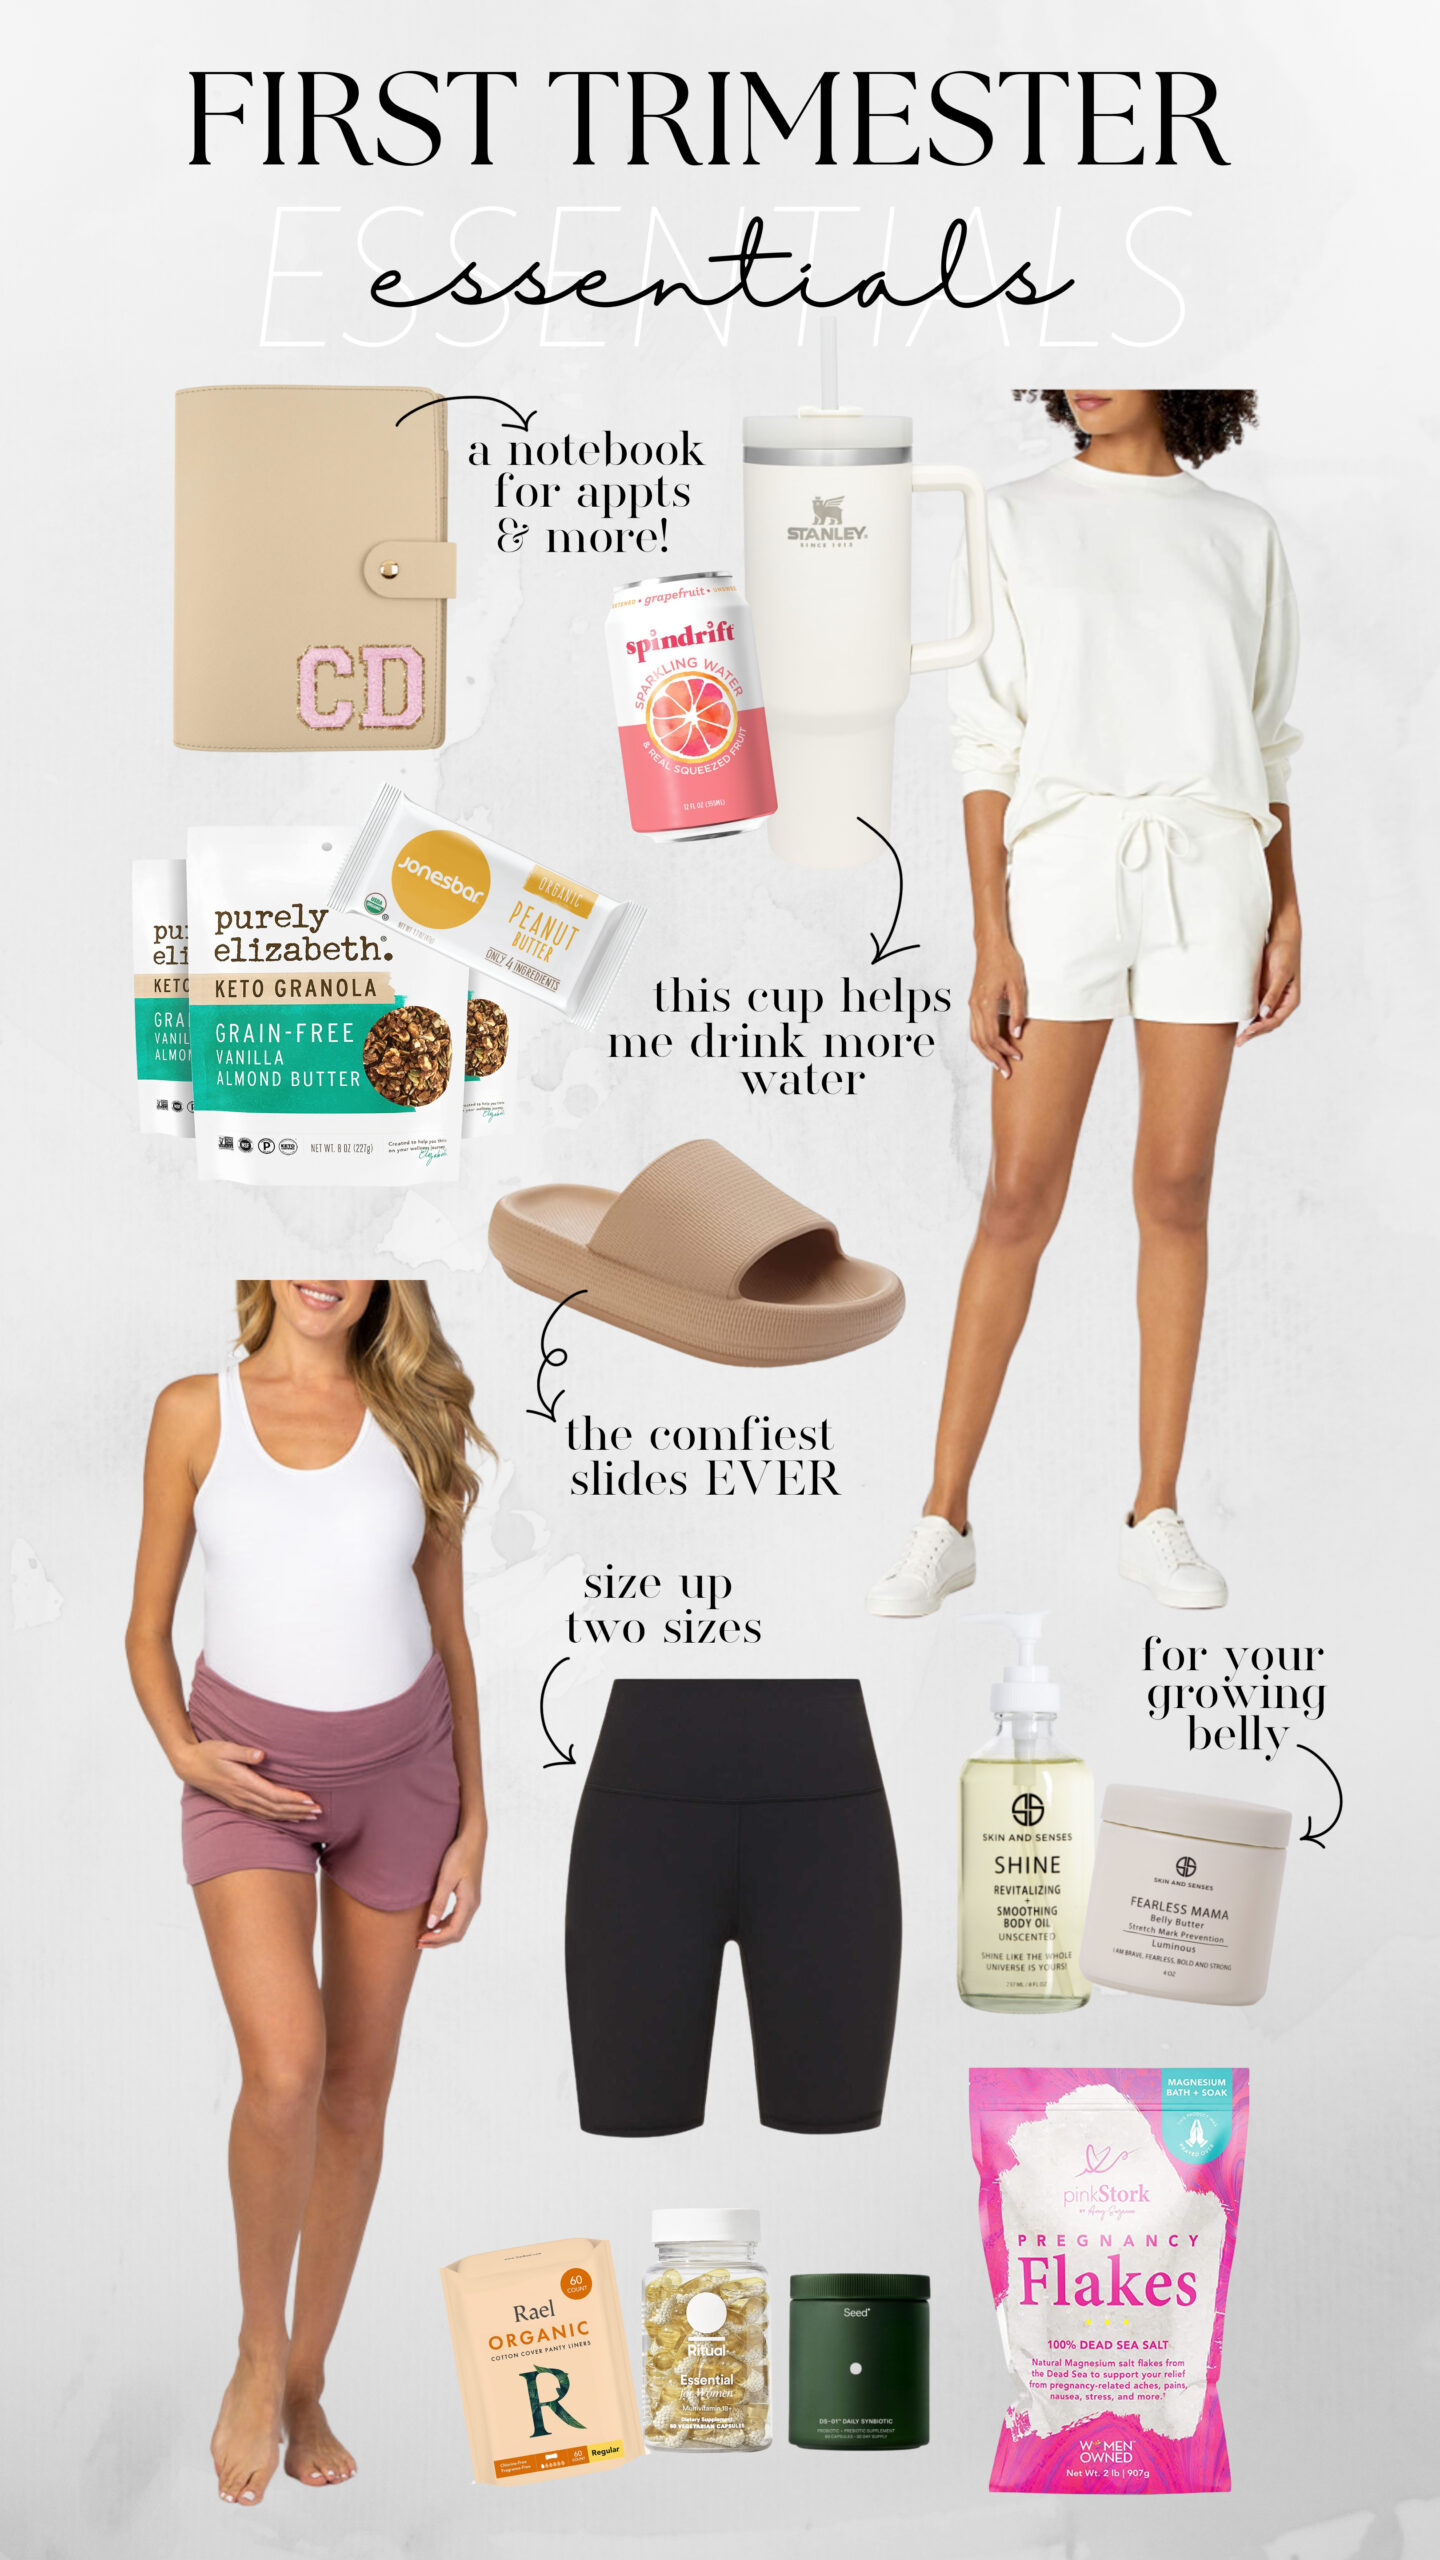 15 Pregnancy Essentials That You Must Have! - Hello Spoonful